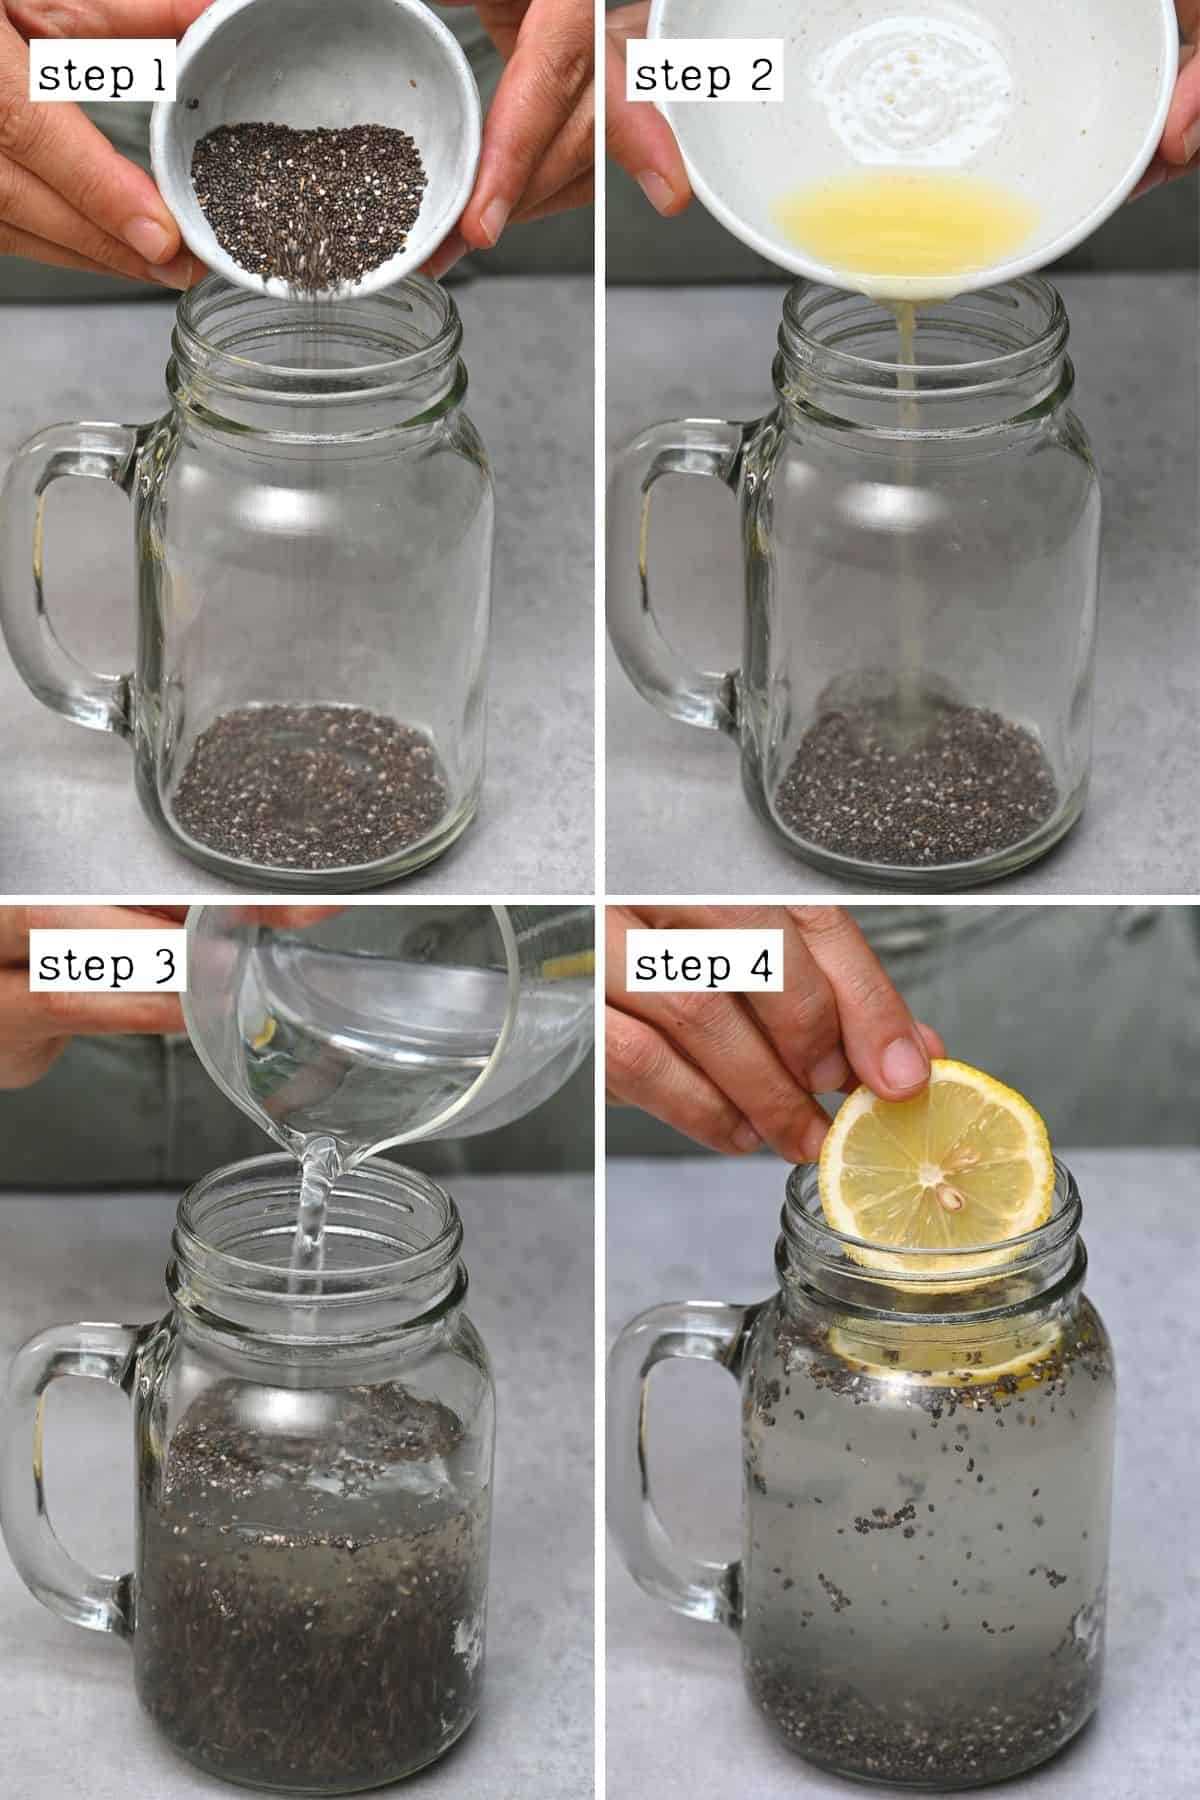 Steps for making chia water